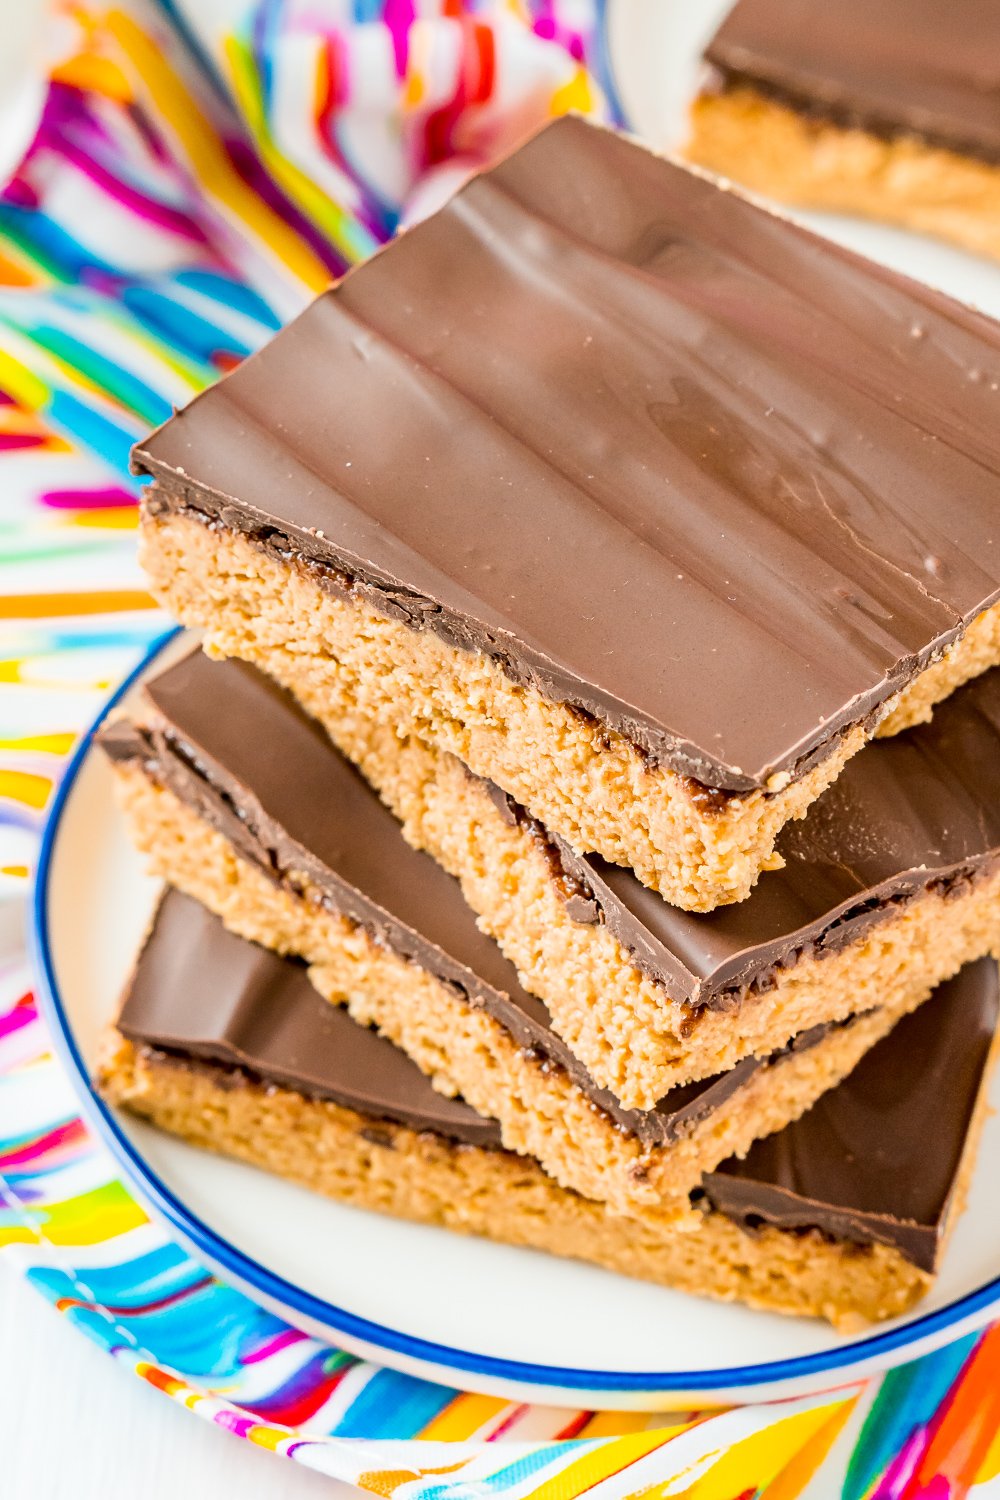 Peanut Butter Bars are a classic, 5-ingredient dessert recipe that can be made in less than 10 minutes! Made with a blend of peanut butter, graham crackers, powdered sugar, butter, and chocolate!